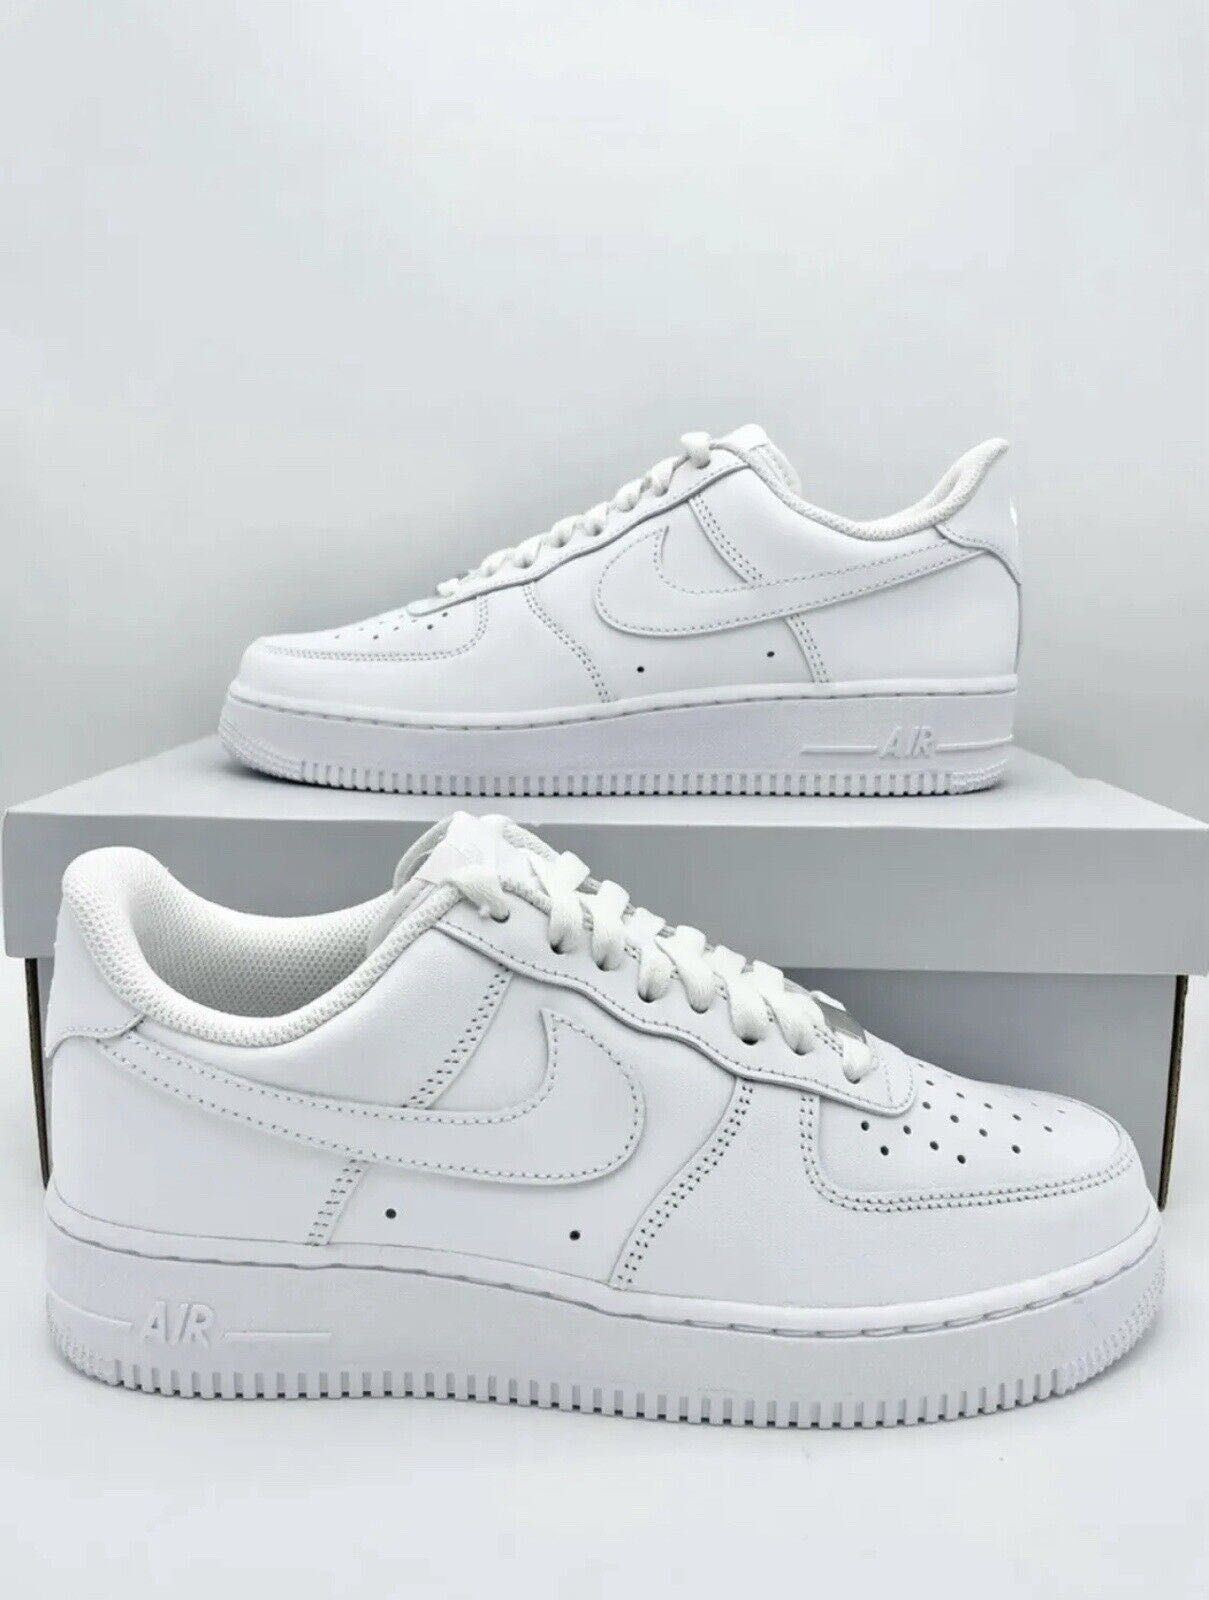 Air Force 1 Nike White Adidasi Unisex NEW Trainers